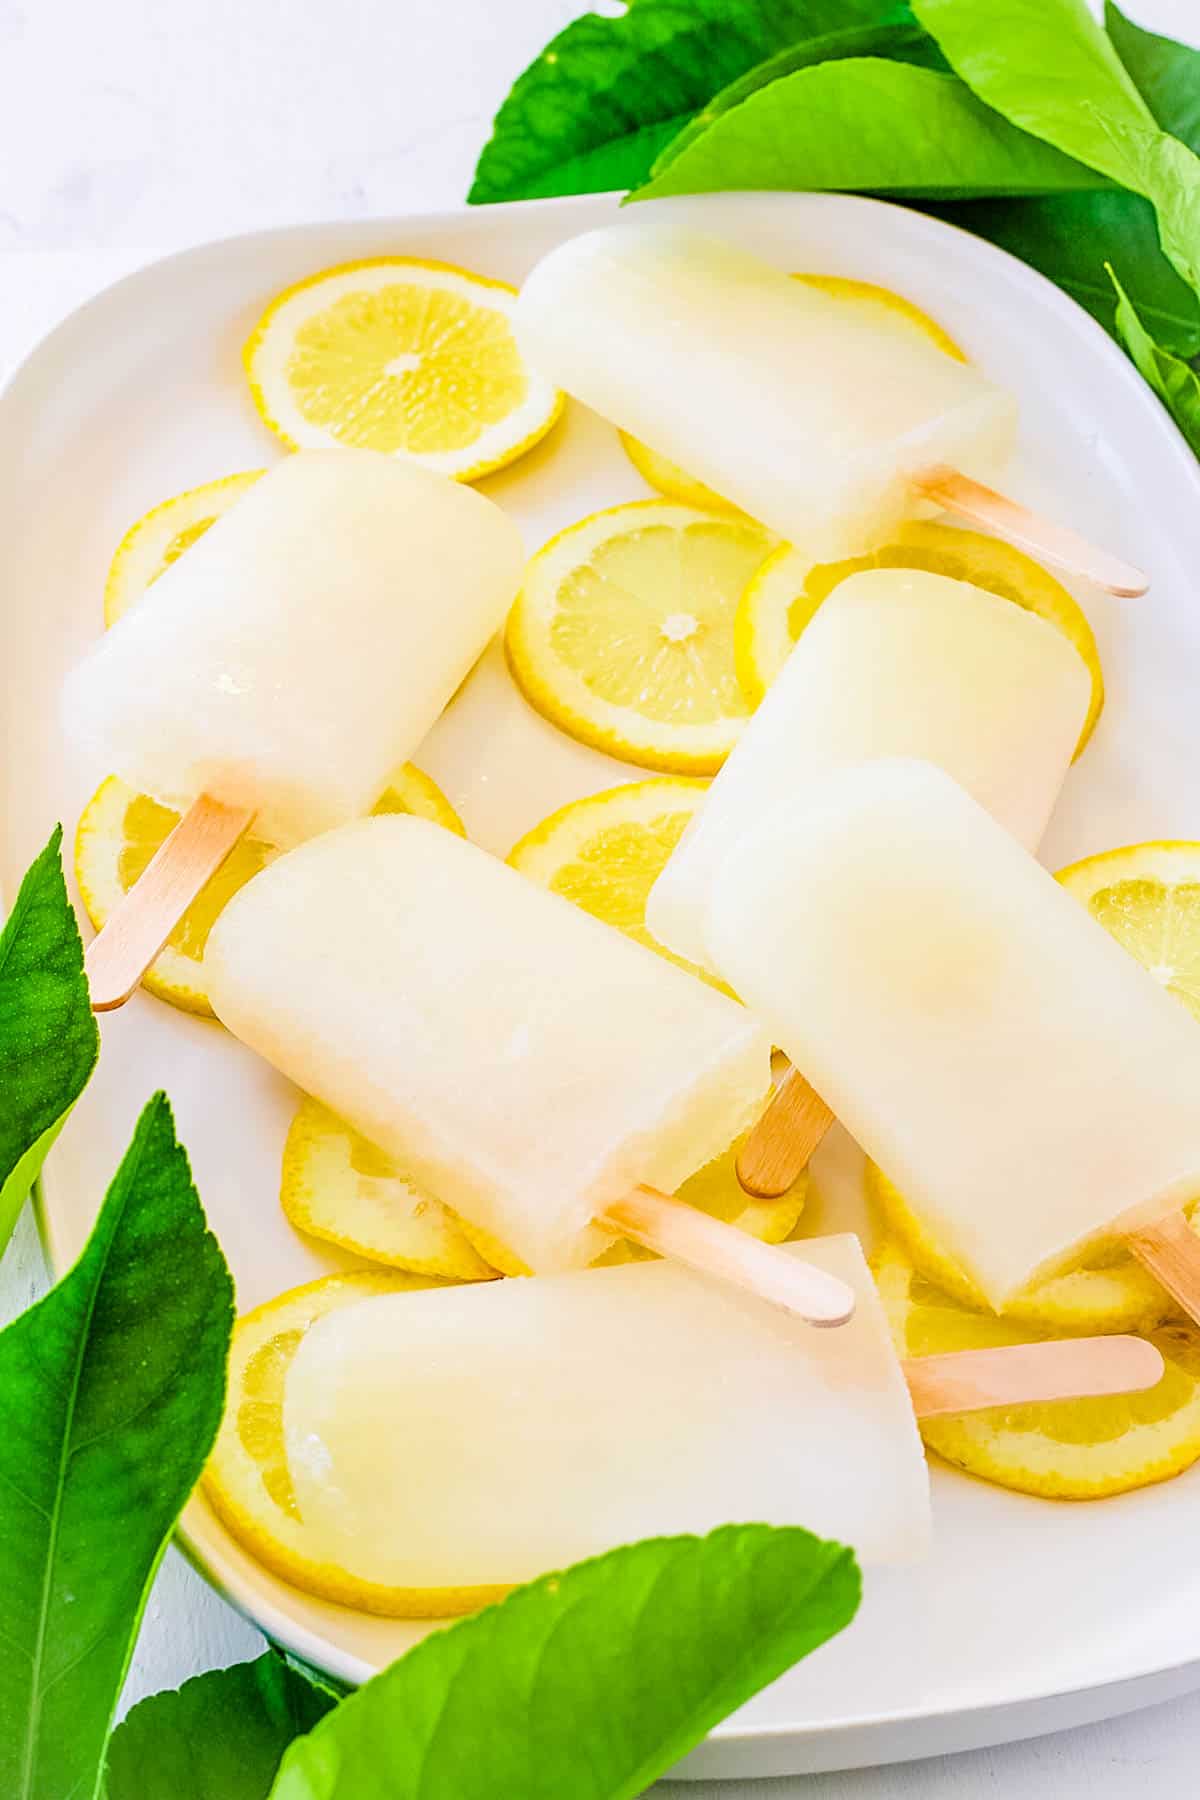 Homemade lemonade popsicles on a white tray with lemon slices as a garnish.